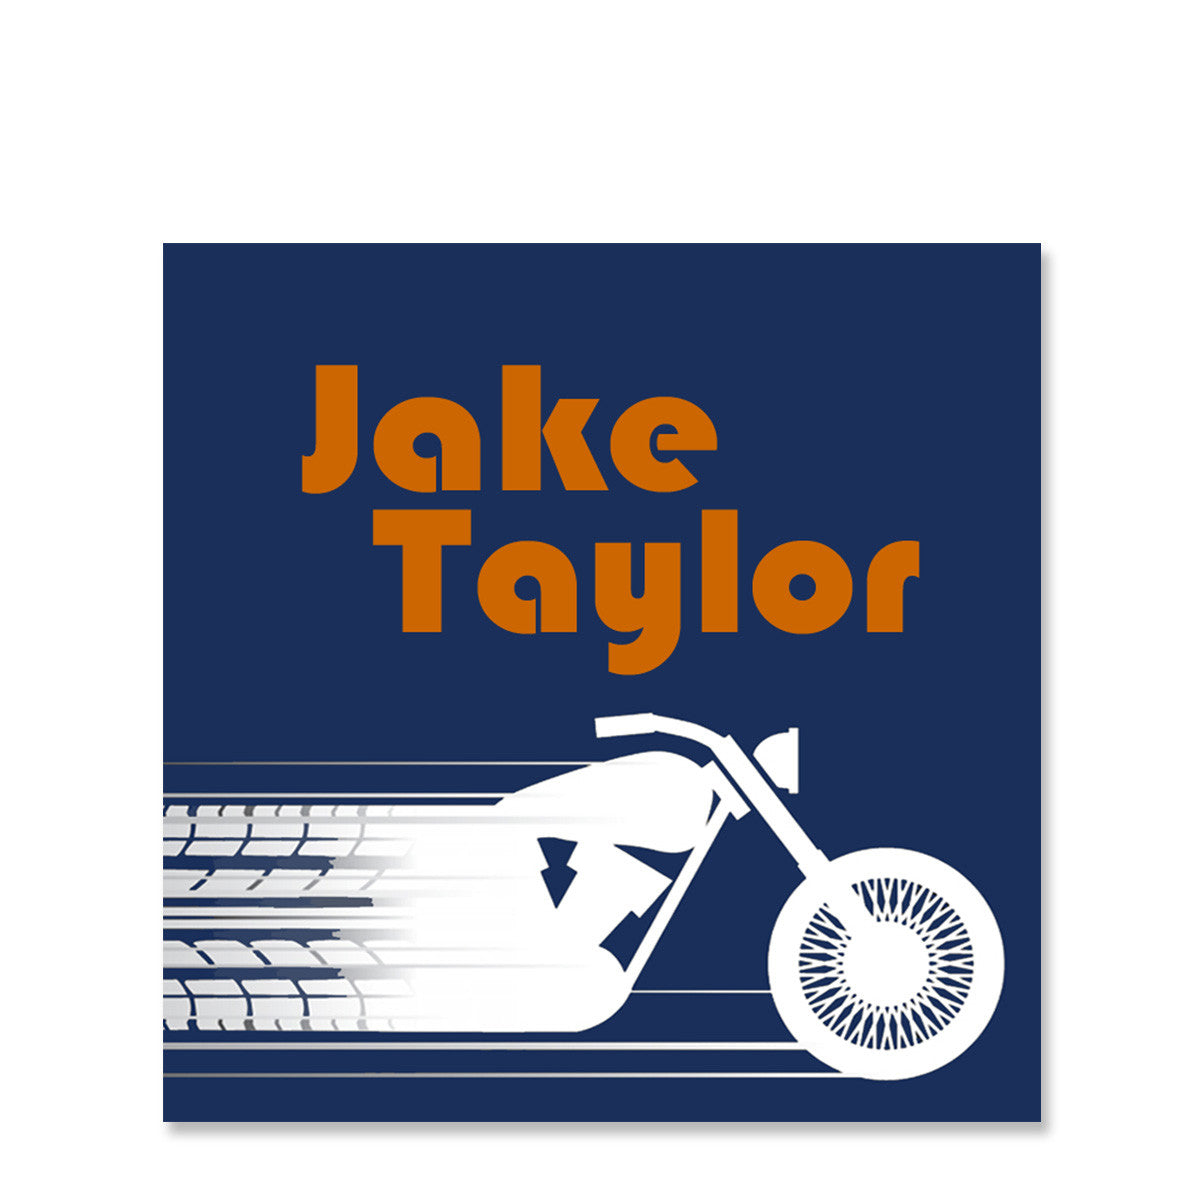 Motorcycle Stickers